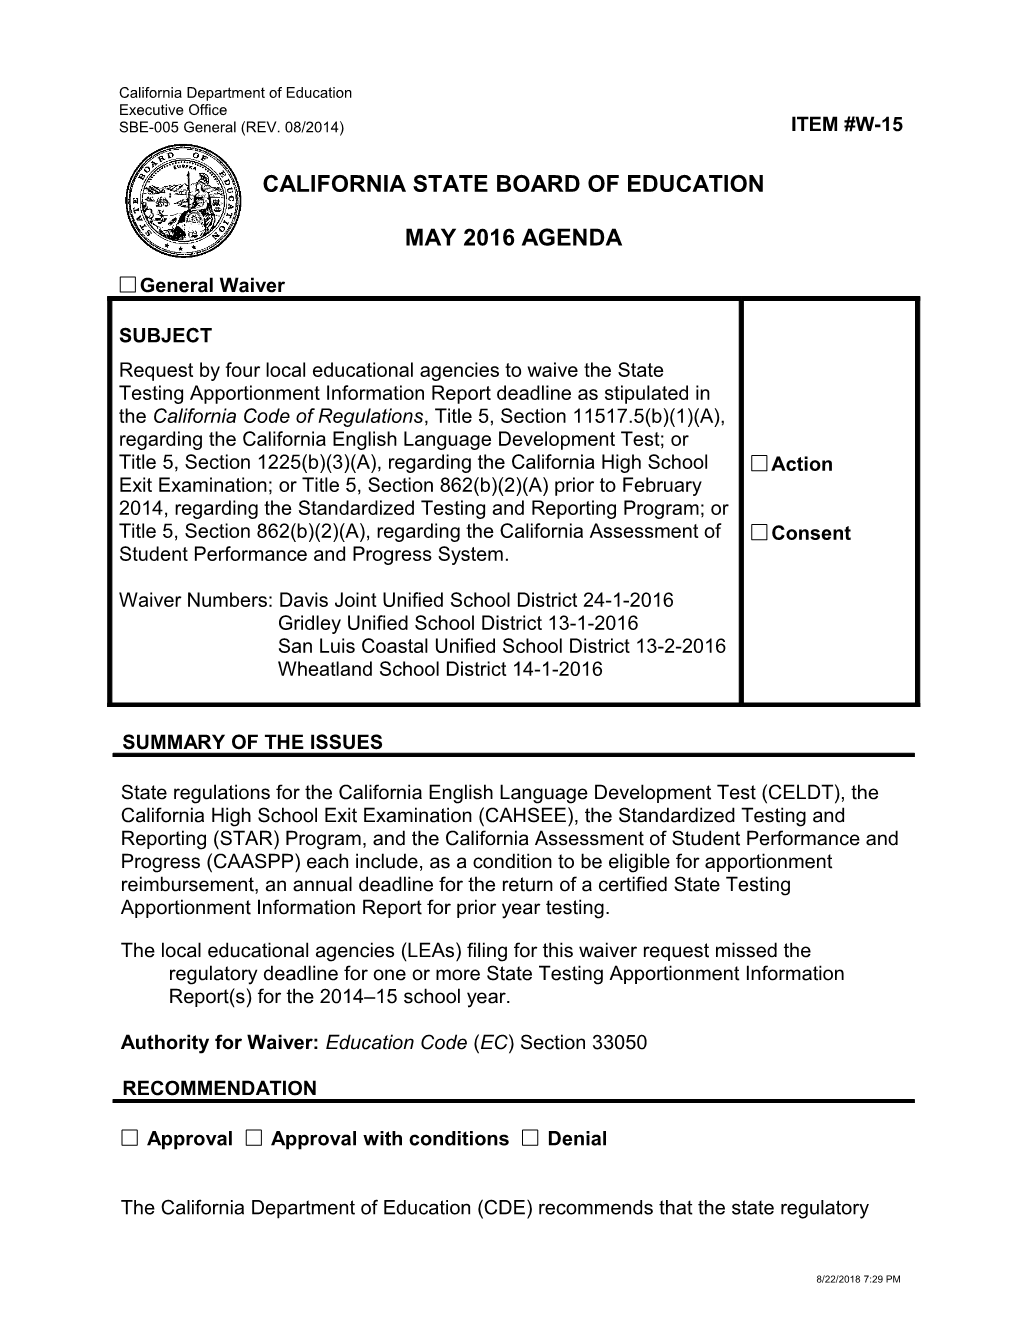 May 2016 Waiver Item W-15 - Meeting Agendas (CA State Board of Education)